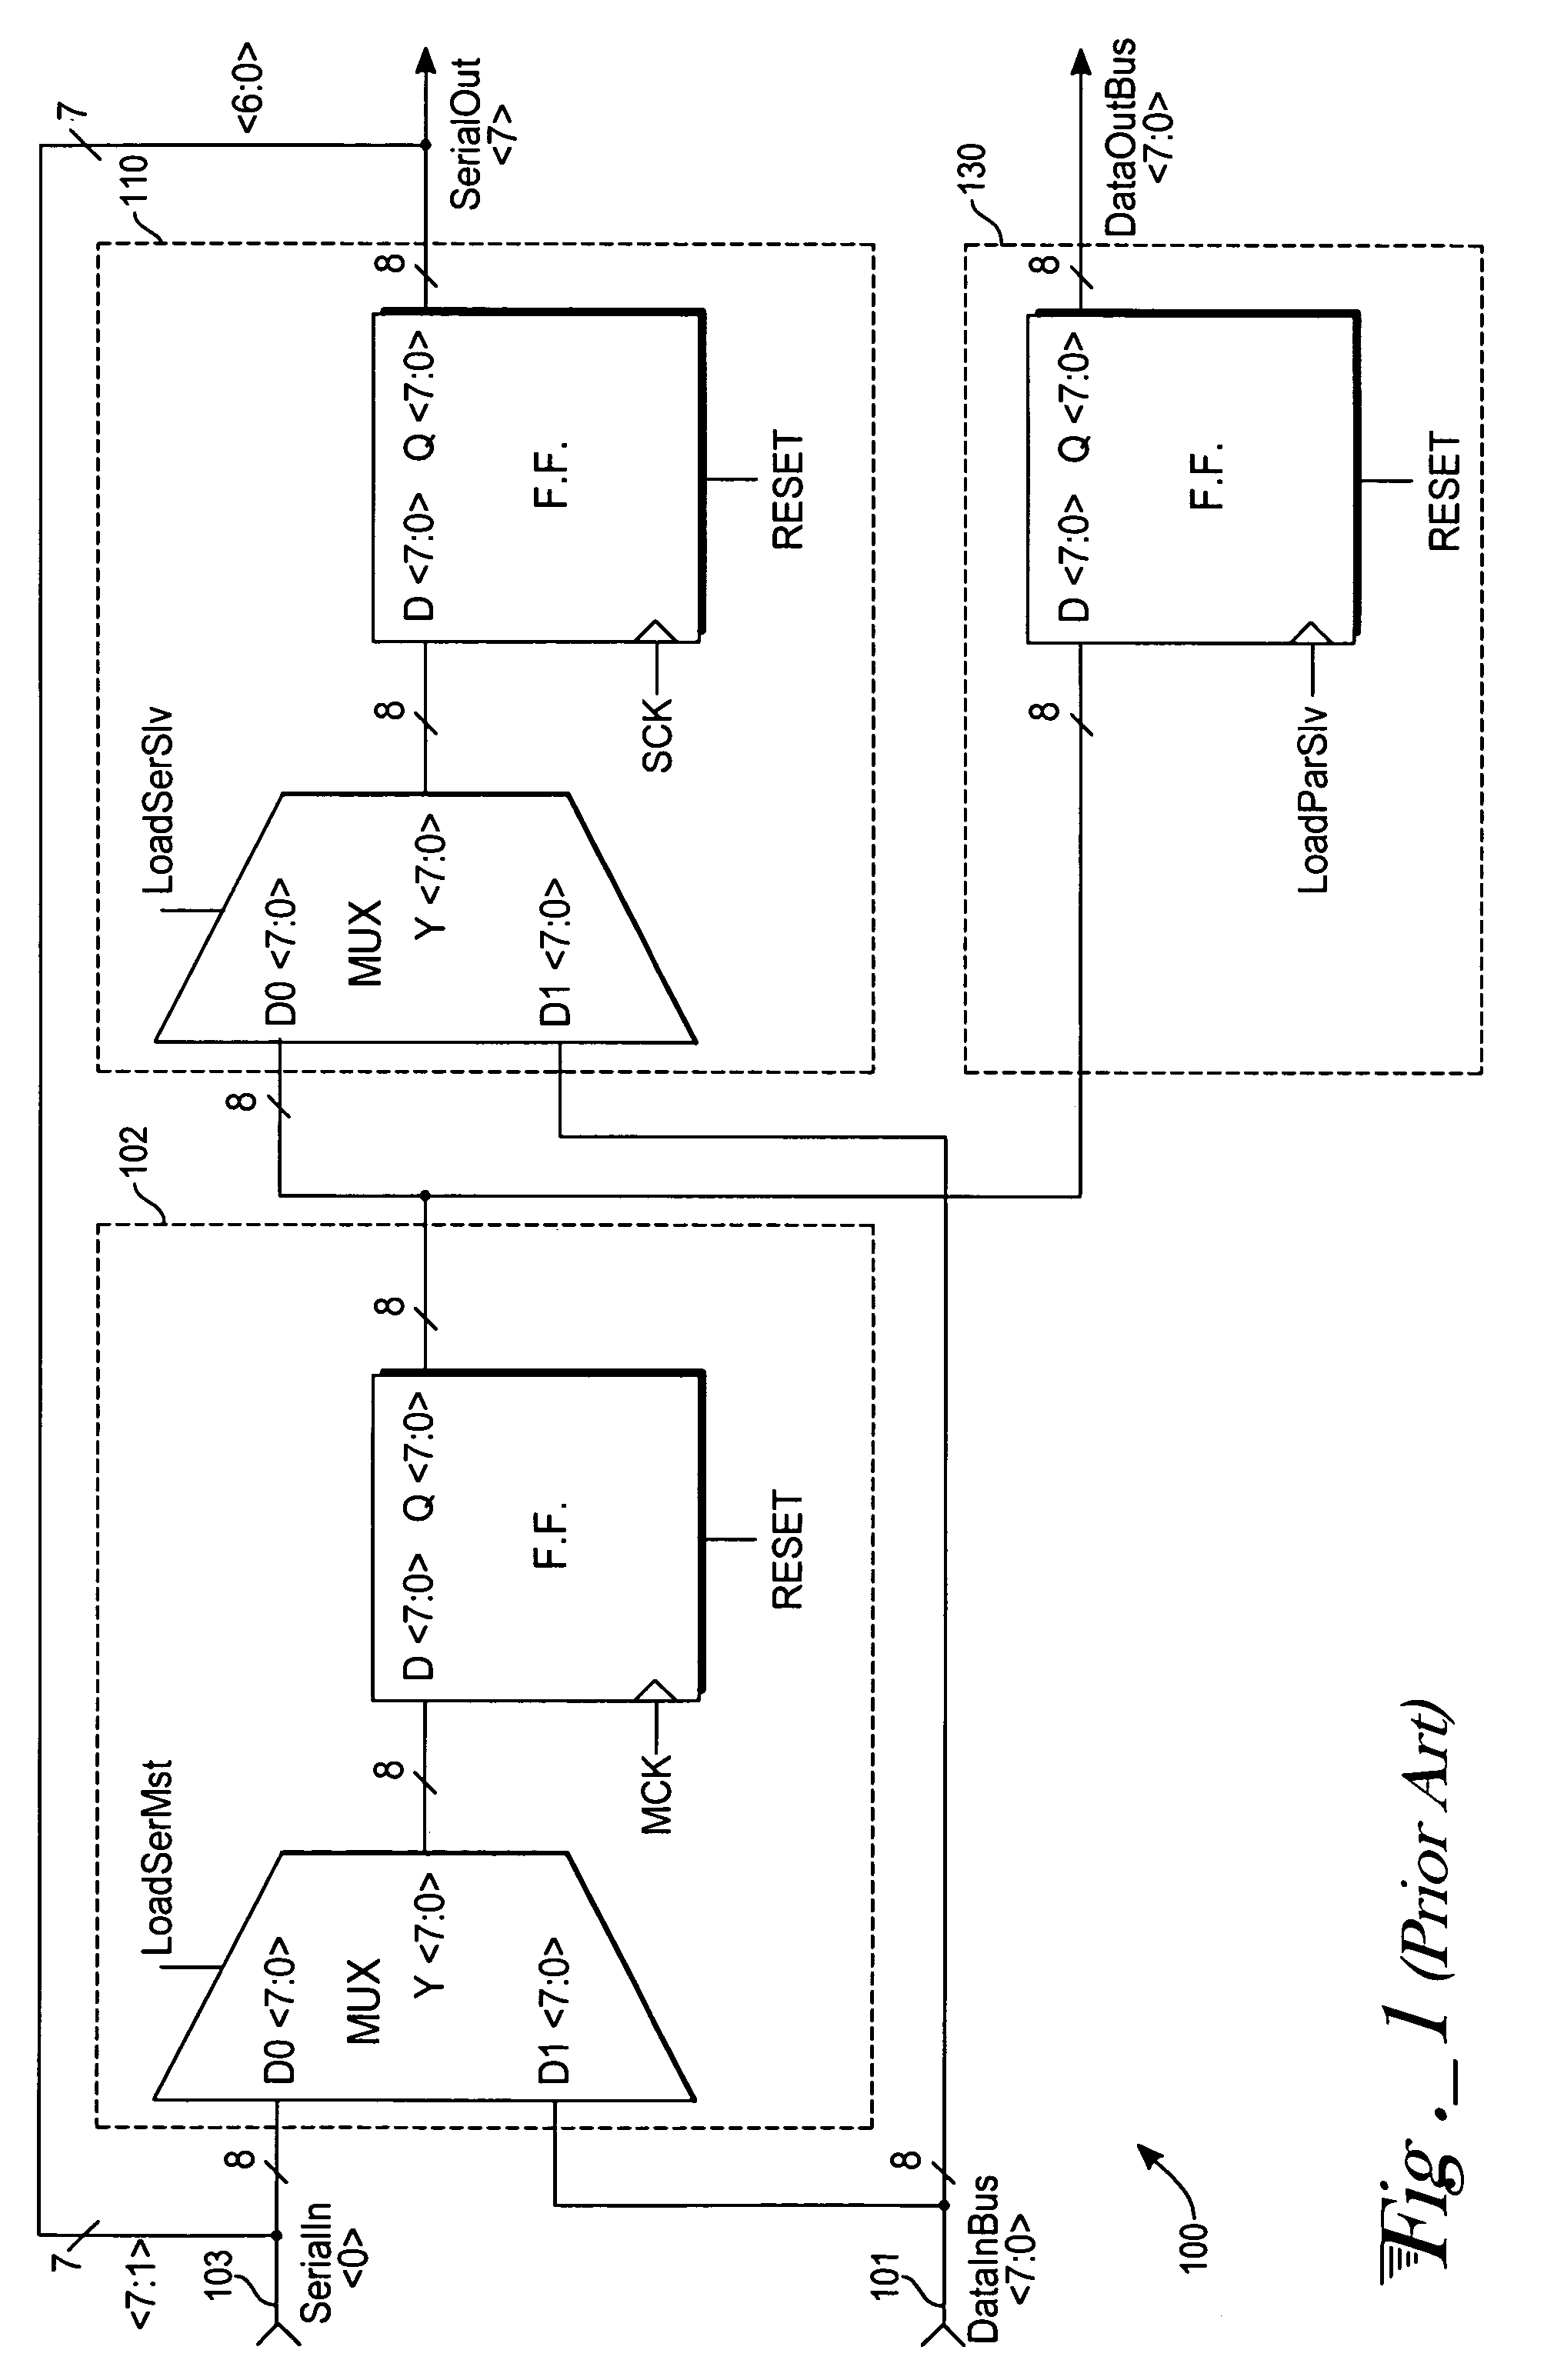 Serial peripheral interface (SPI) apparatus with write buffer for improving data throughput